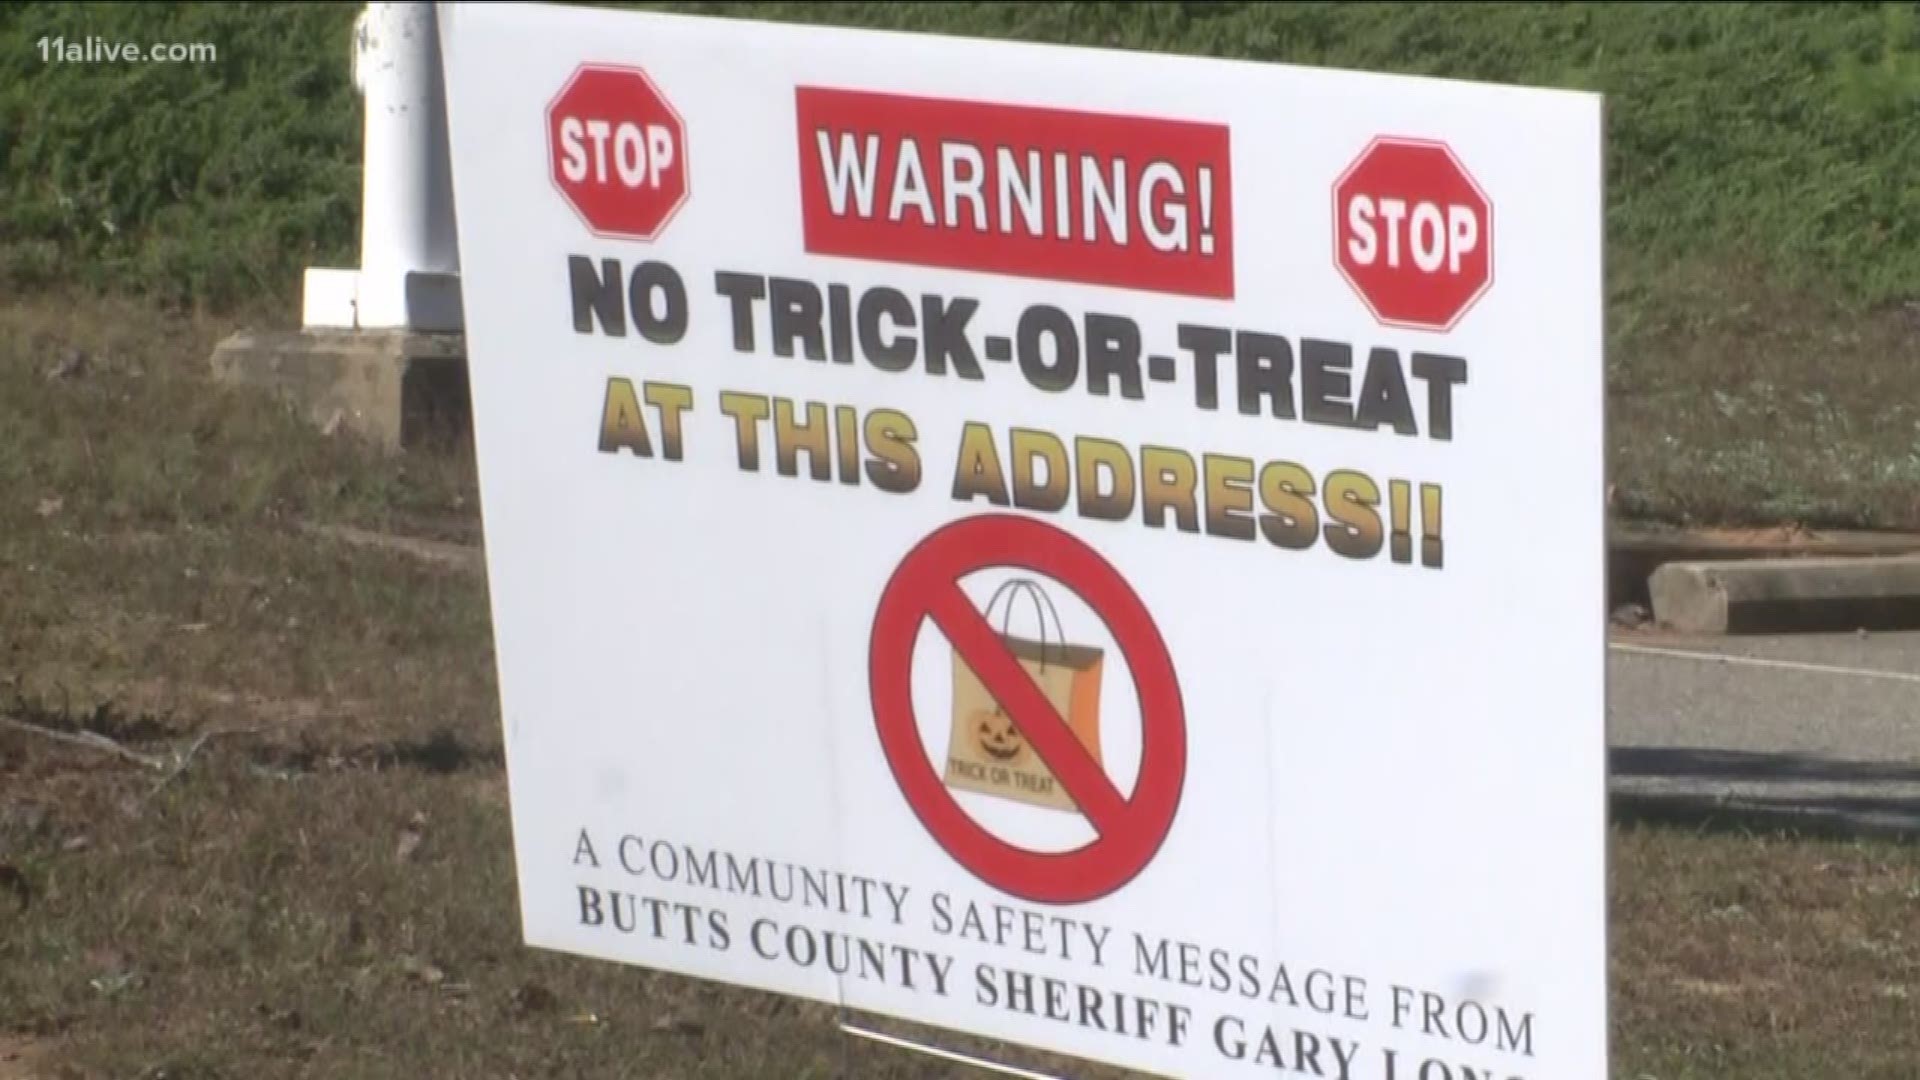 A woman's husband, who is on the sex offender risk, has been called out in a poster outside their Butts County home ahead of Halloween.